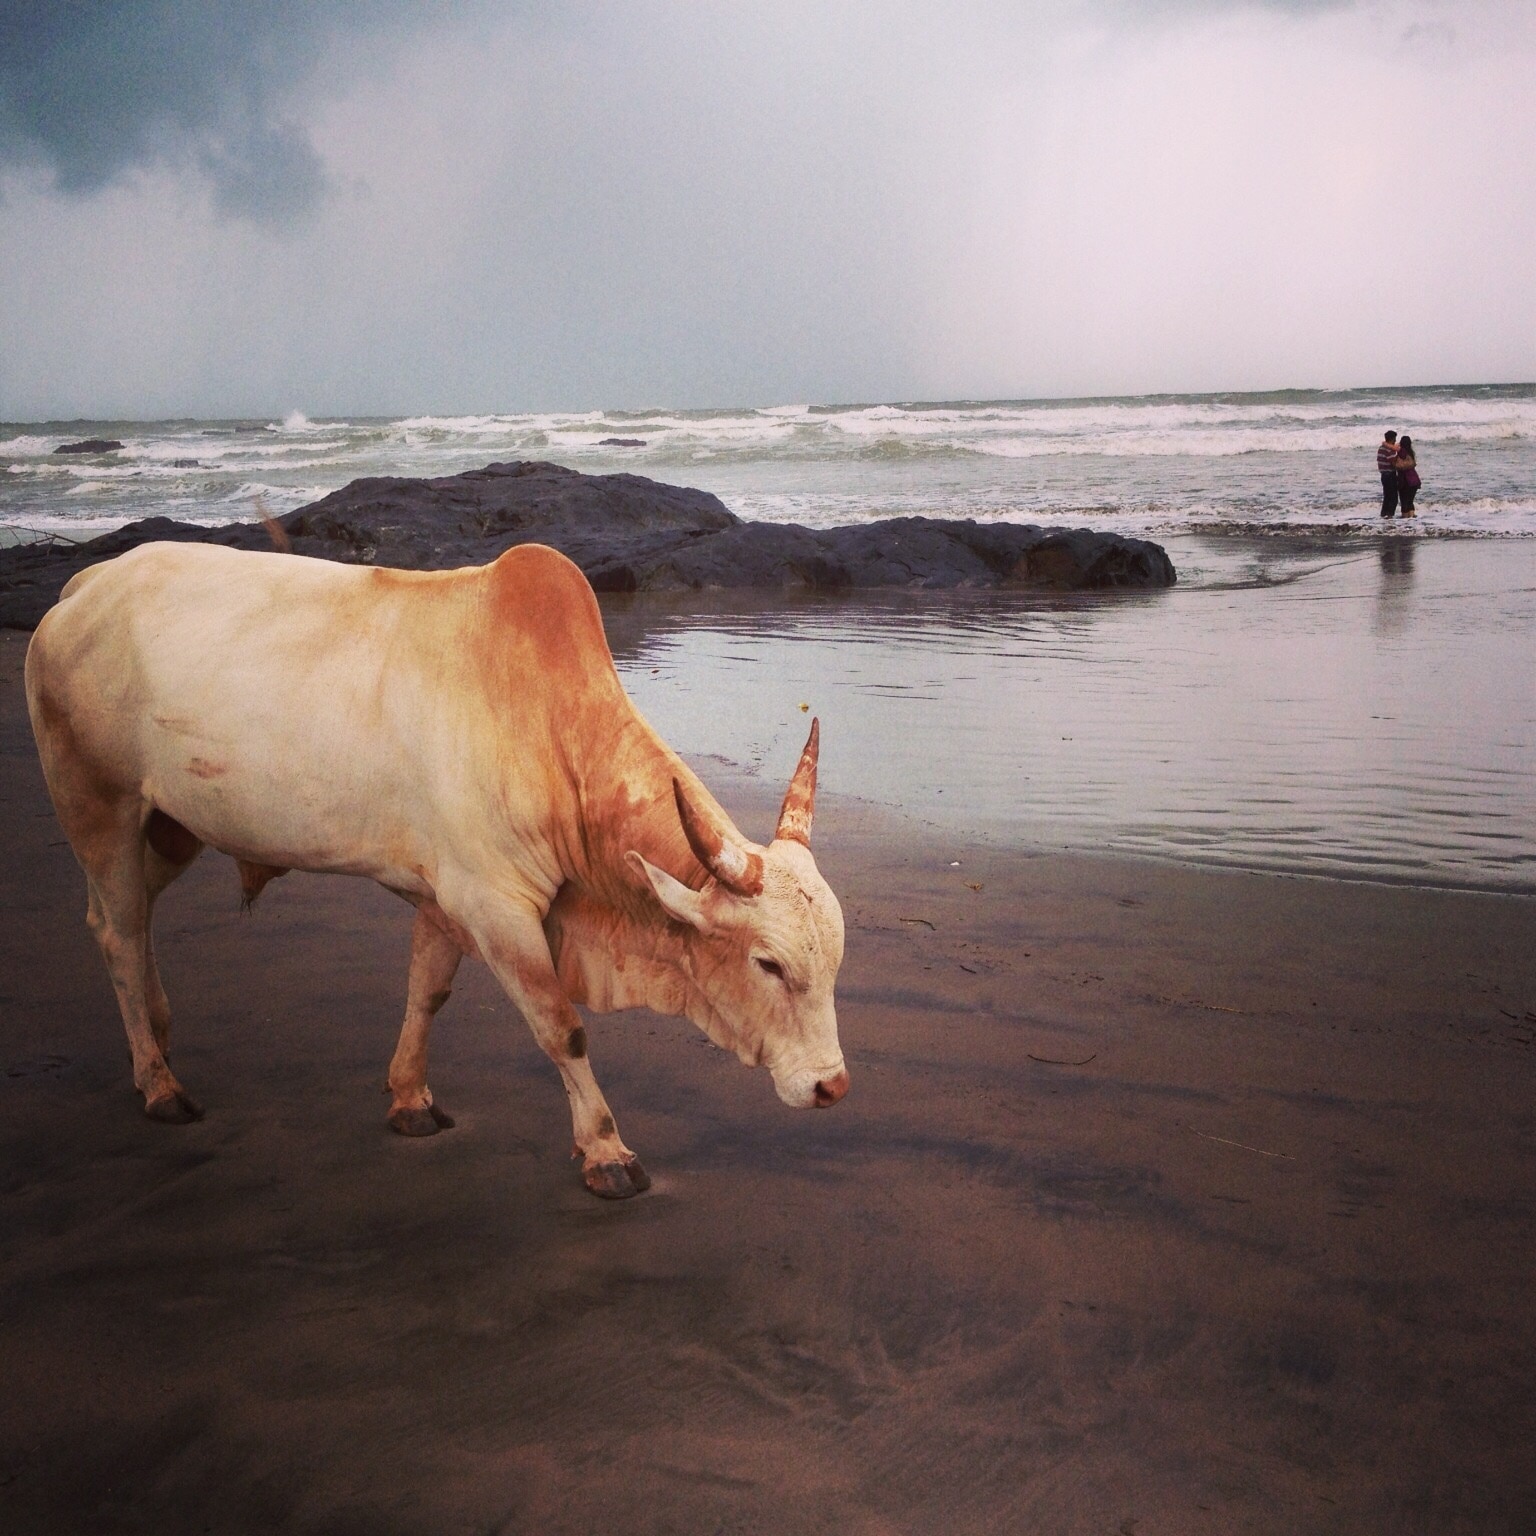 Cows are considered sacred in India, so you will find lots of them roaming around everywhere, on the streets and even at the beach. #LifeAtExpedia